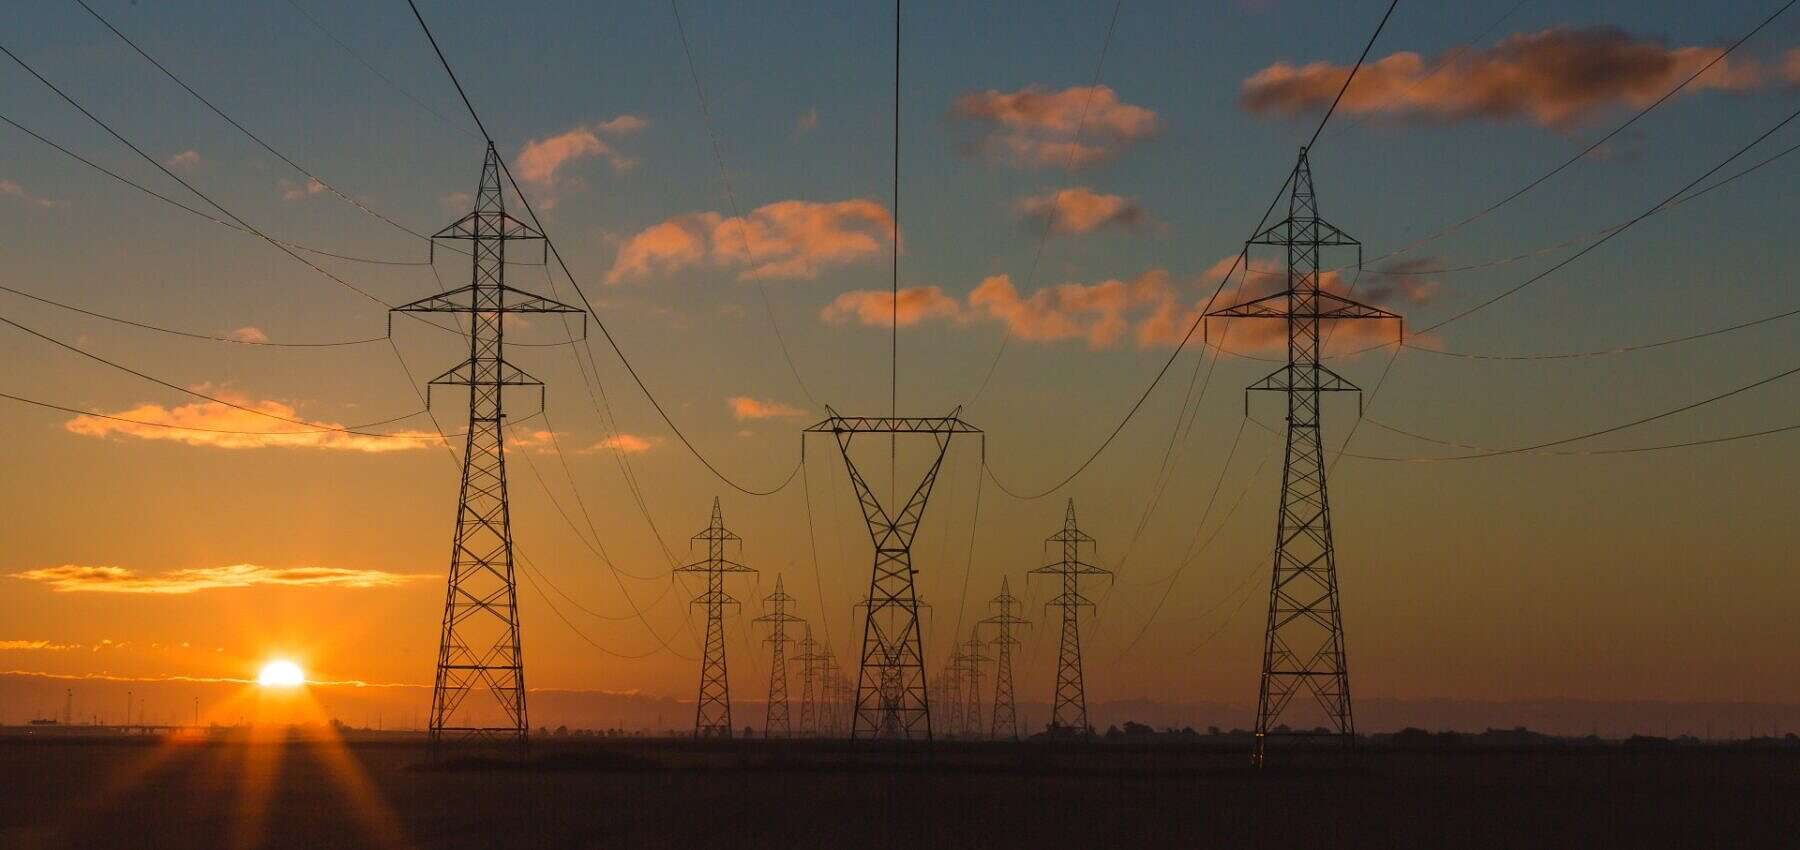 Electric utility towers